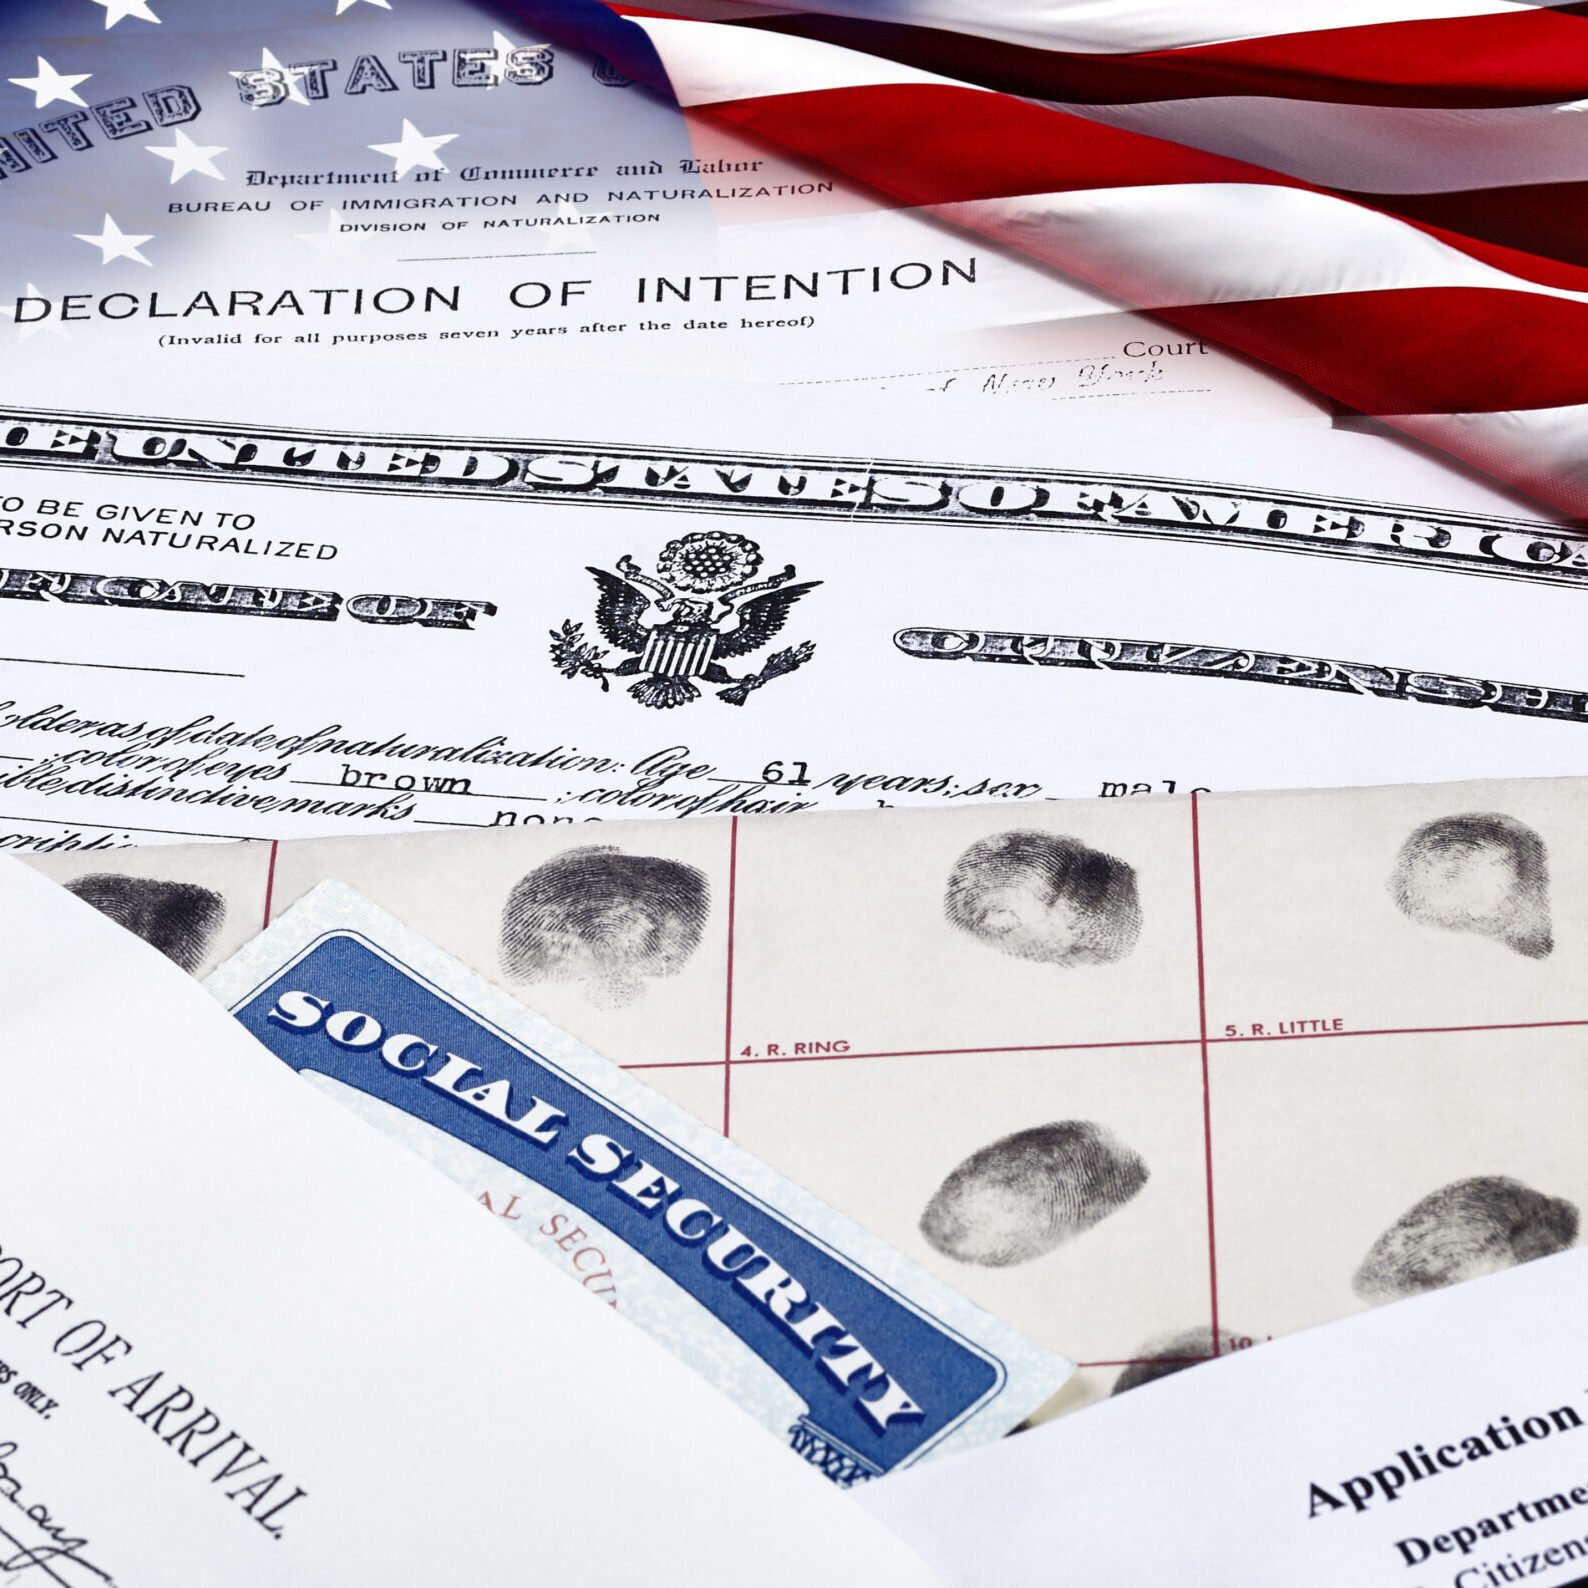 US Certificate of Citizenship, declaration of intention, fingerpirnt card, social security card, application for naturalization and port of arrival manifest with red, white and blue ribbon